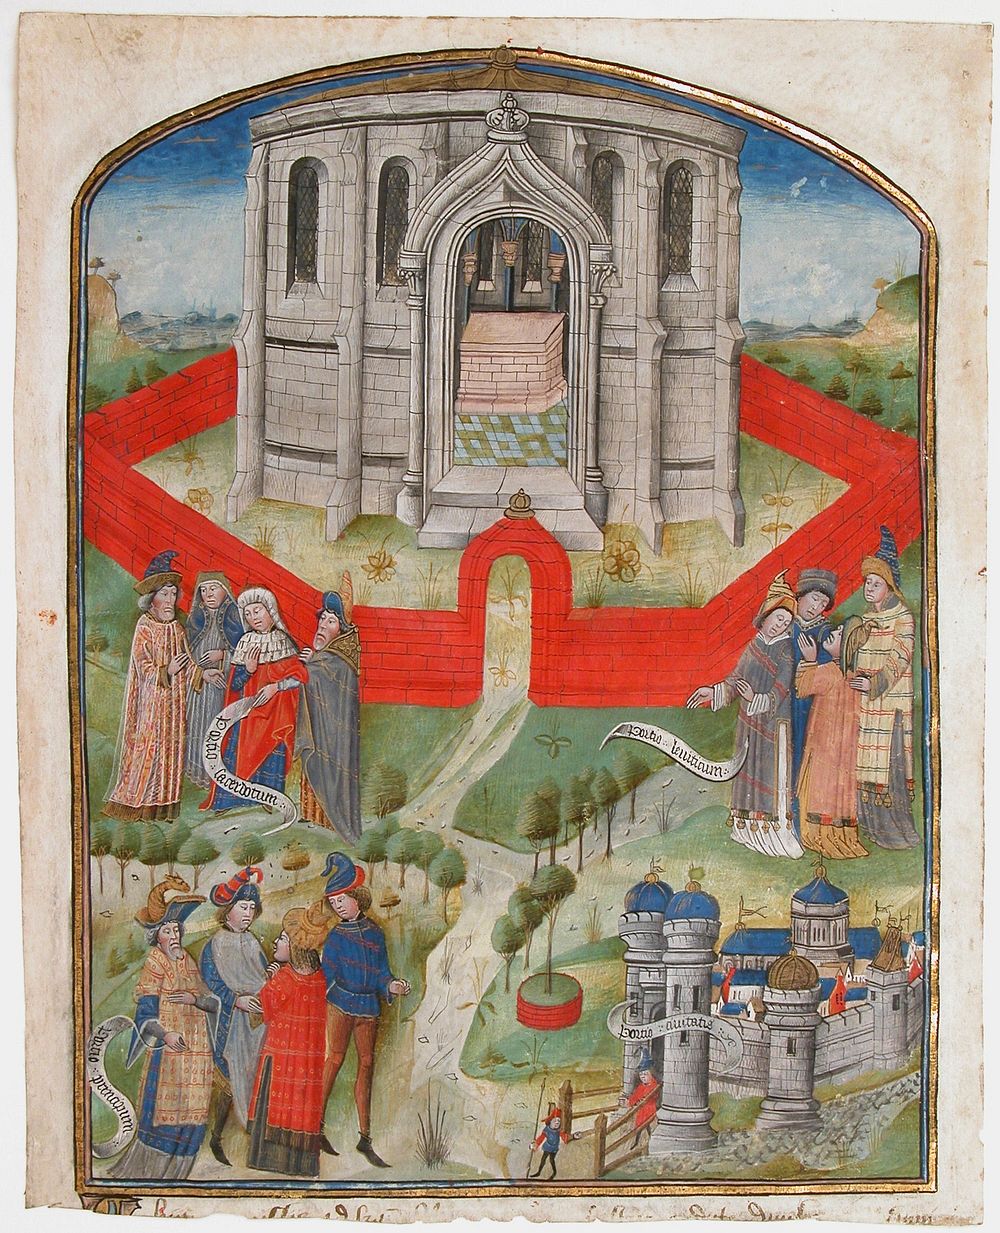 The Temple in Jerusalem, from the "Postilla Litteralis (Literal Commentary)" of Nicholas of Lyra, Netherlandish